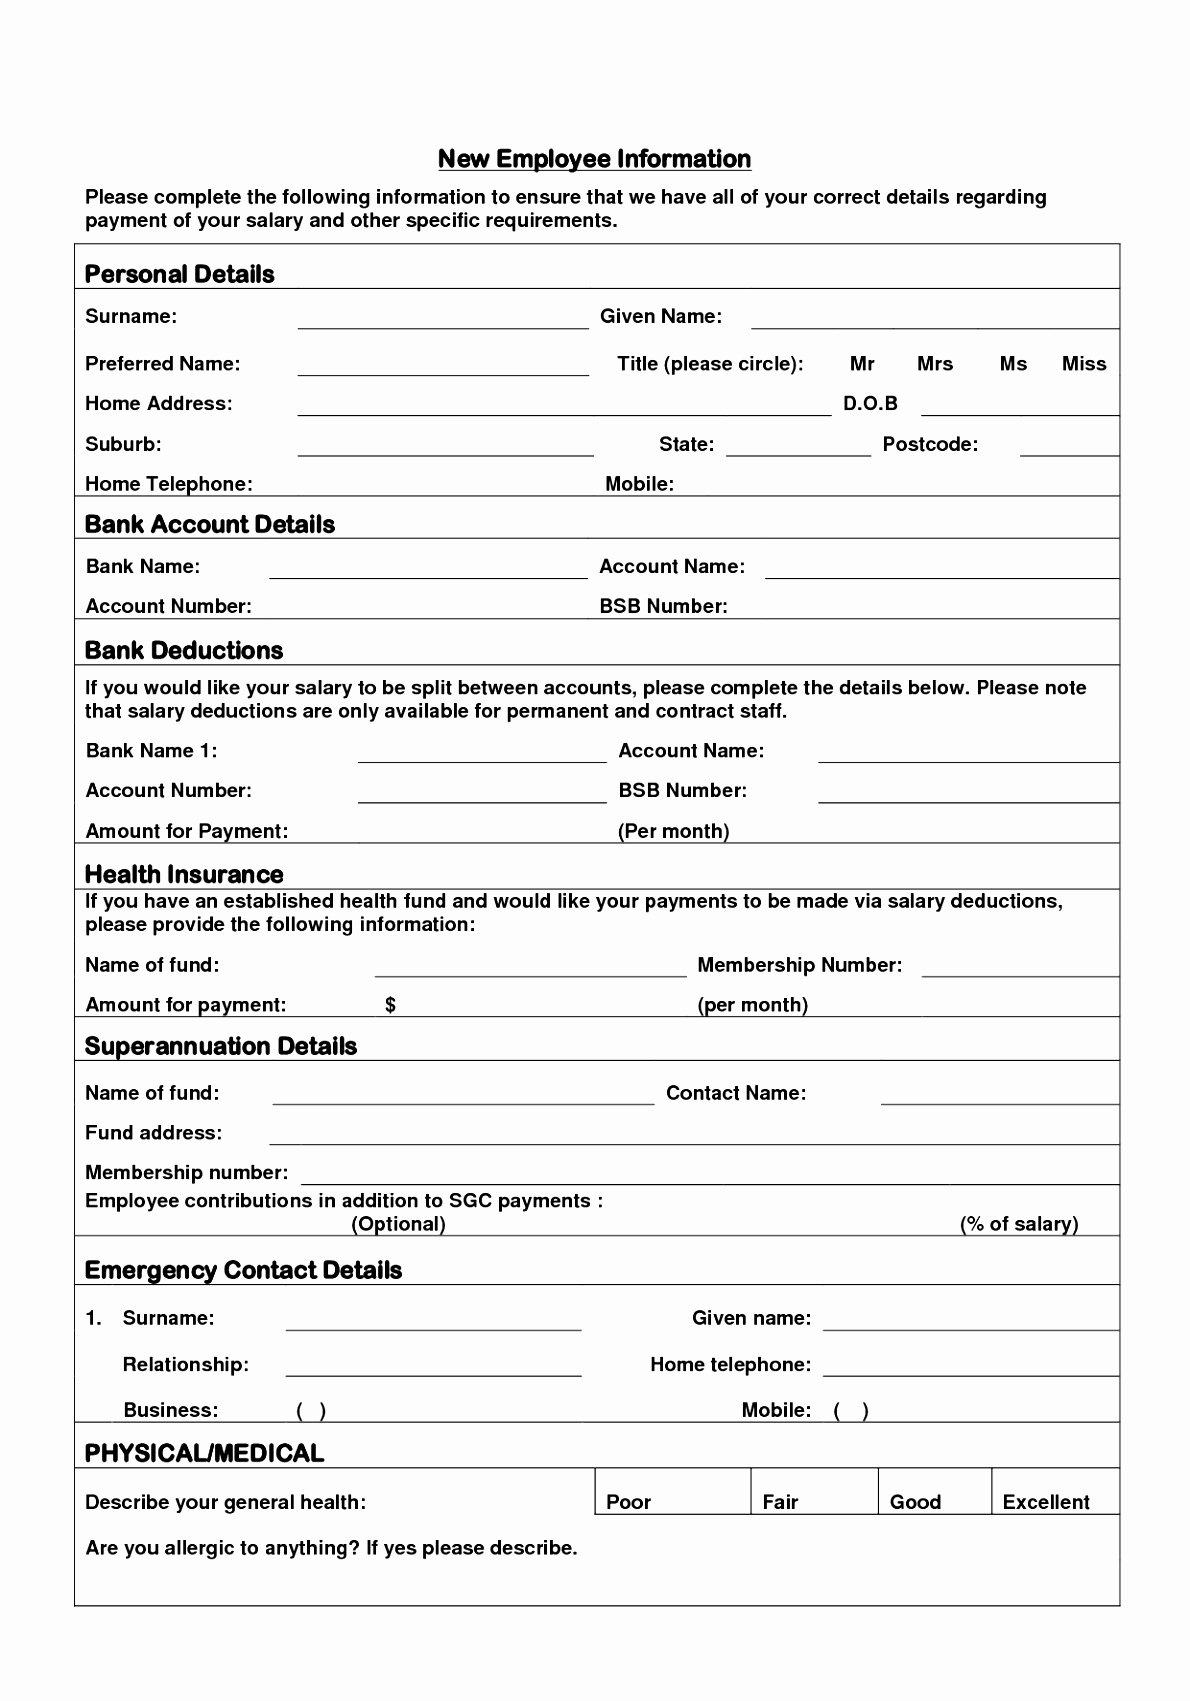 New Hire form Template Awesome 99 New Hire form Template 12 New Hire Processing forms